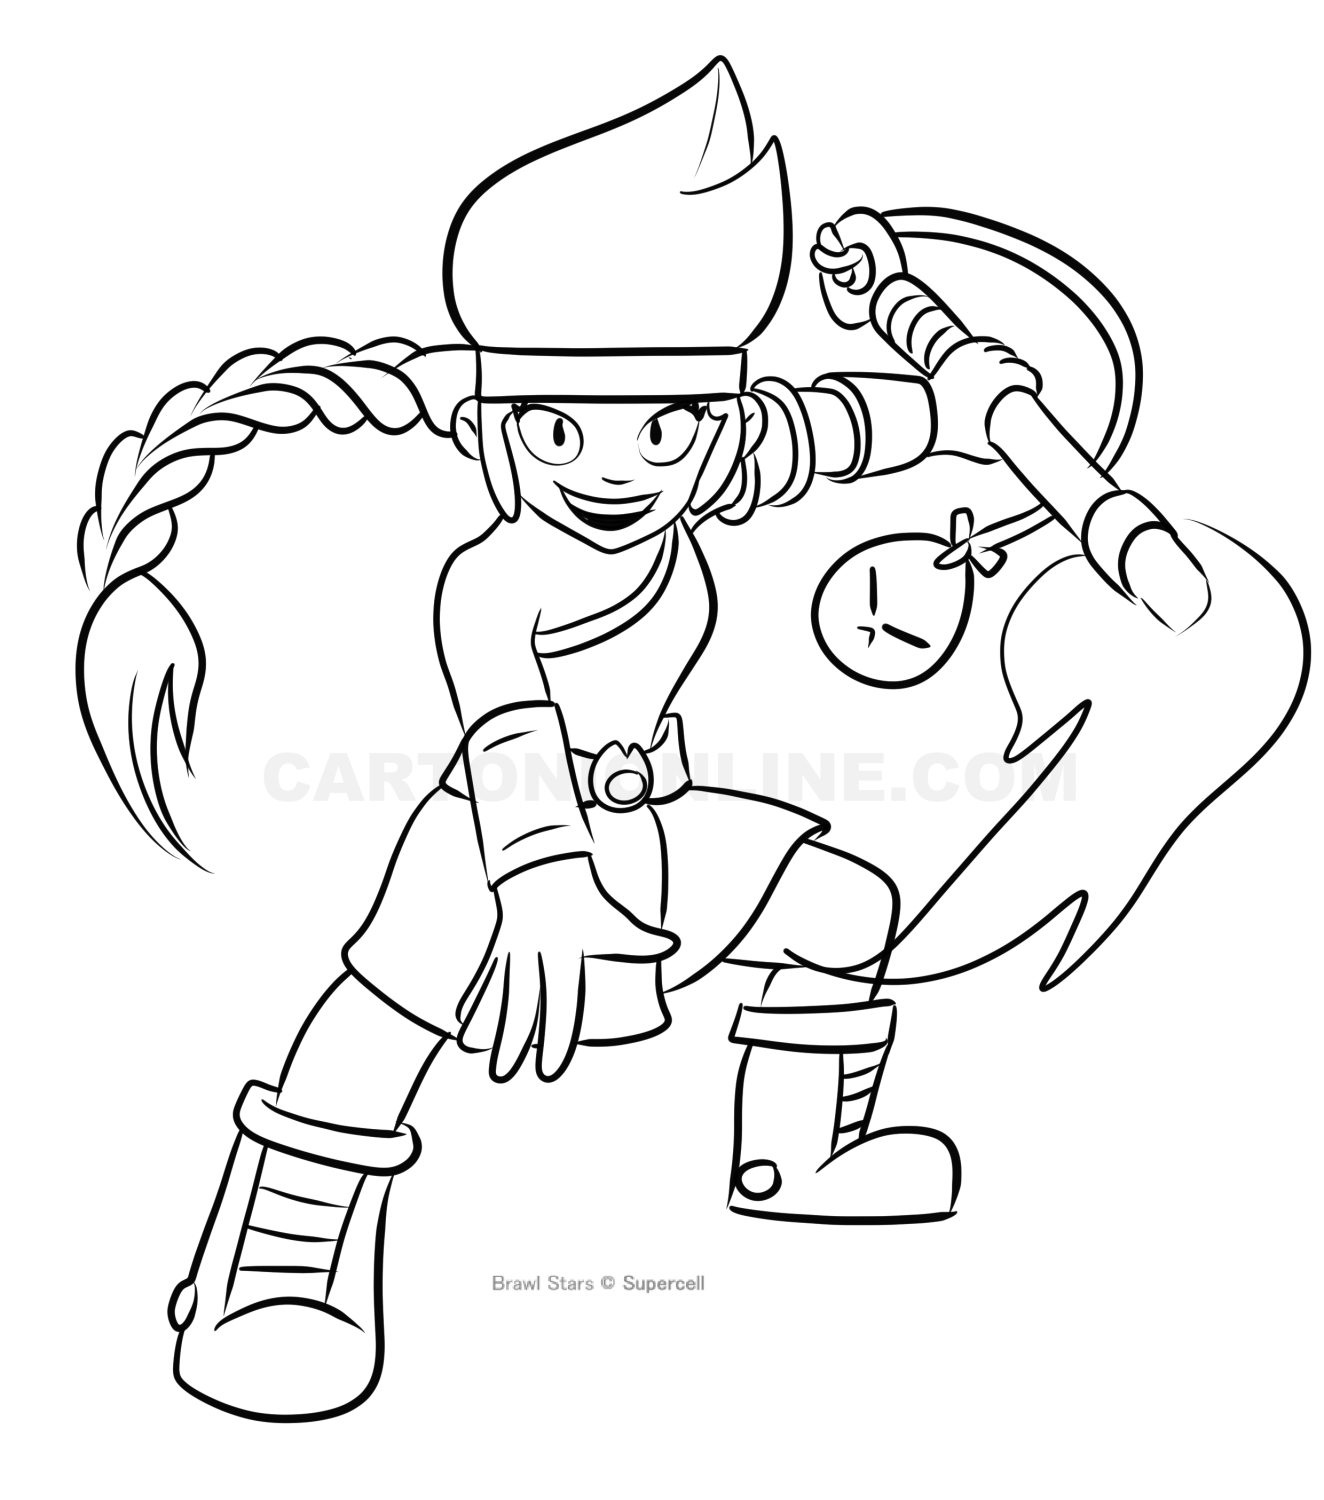 30+ Brawl Stars Coloring Pages Amber - BrodieRonin